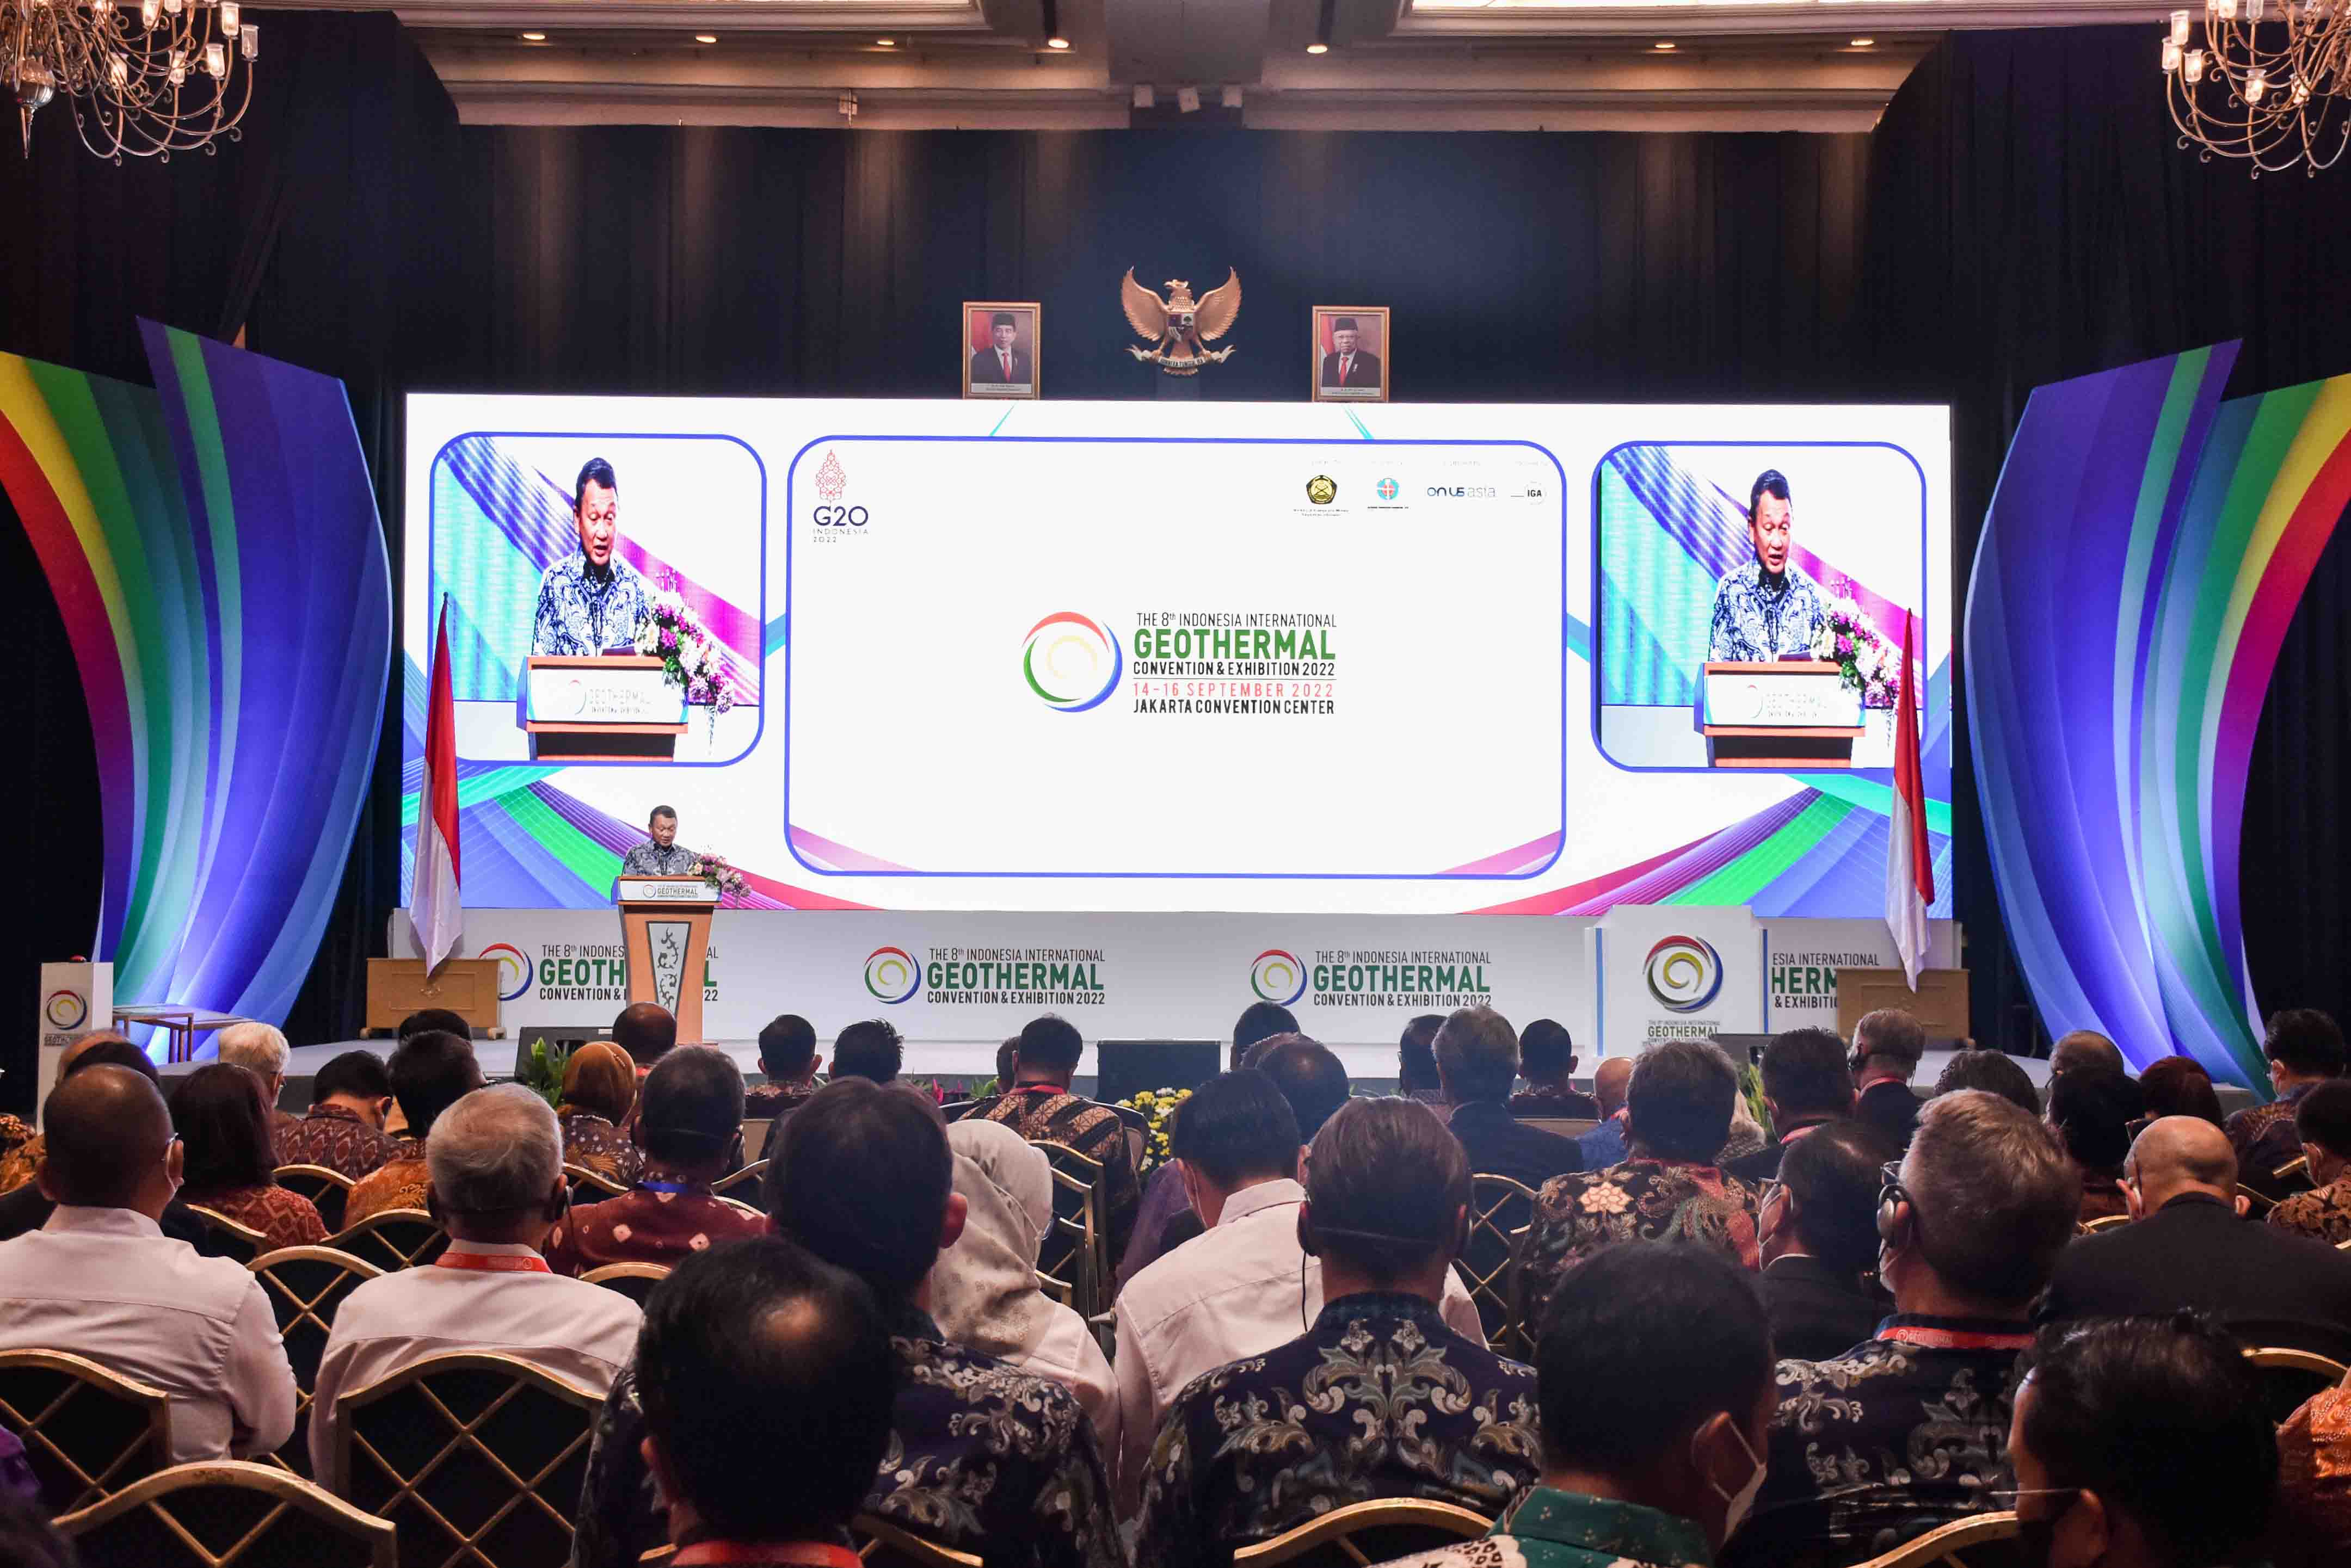 Opening Ceremony of The 8th Indonesia International Geothermal Convention & Exhibition (IIGCE) 2022